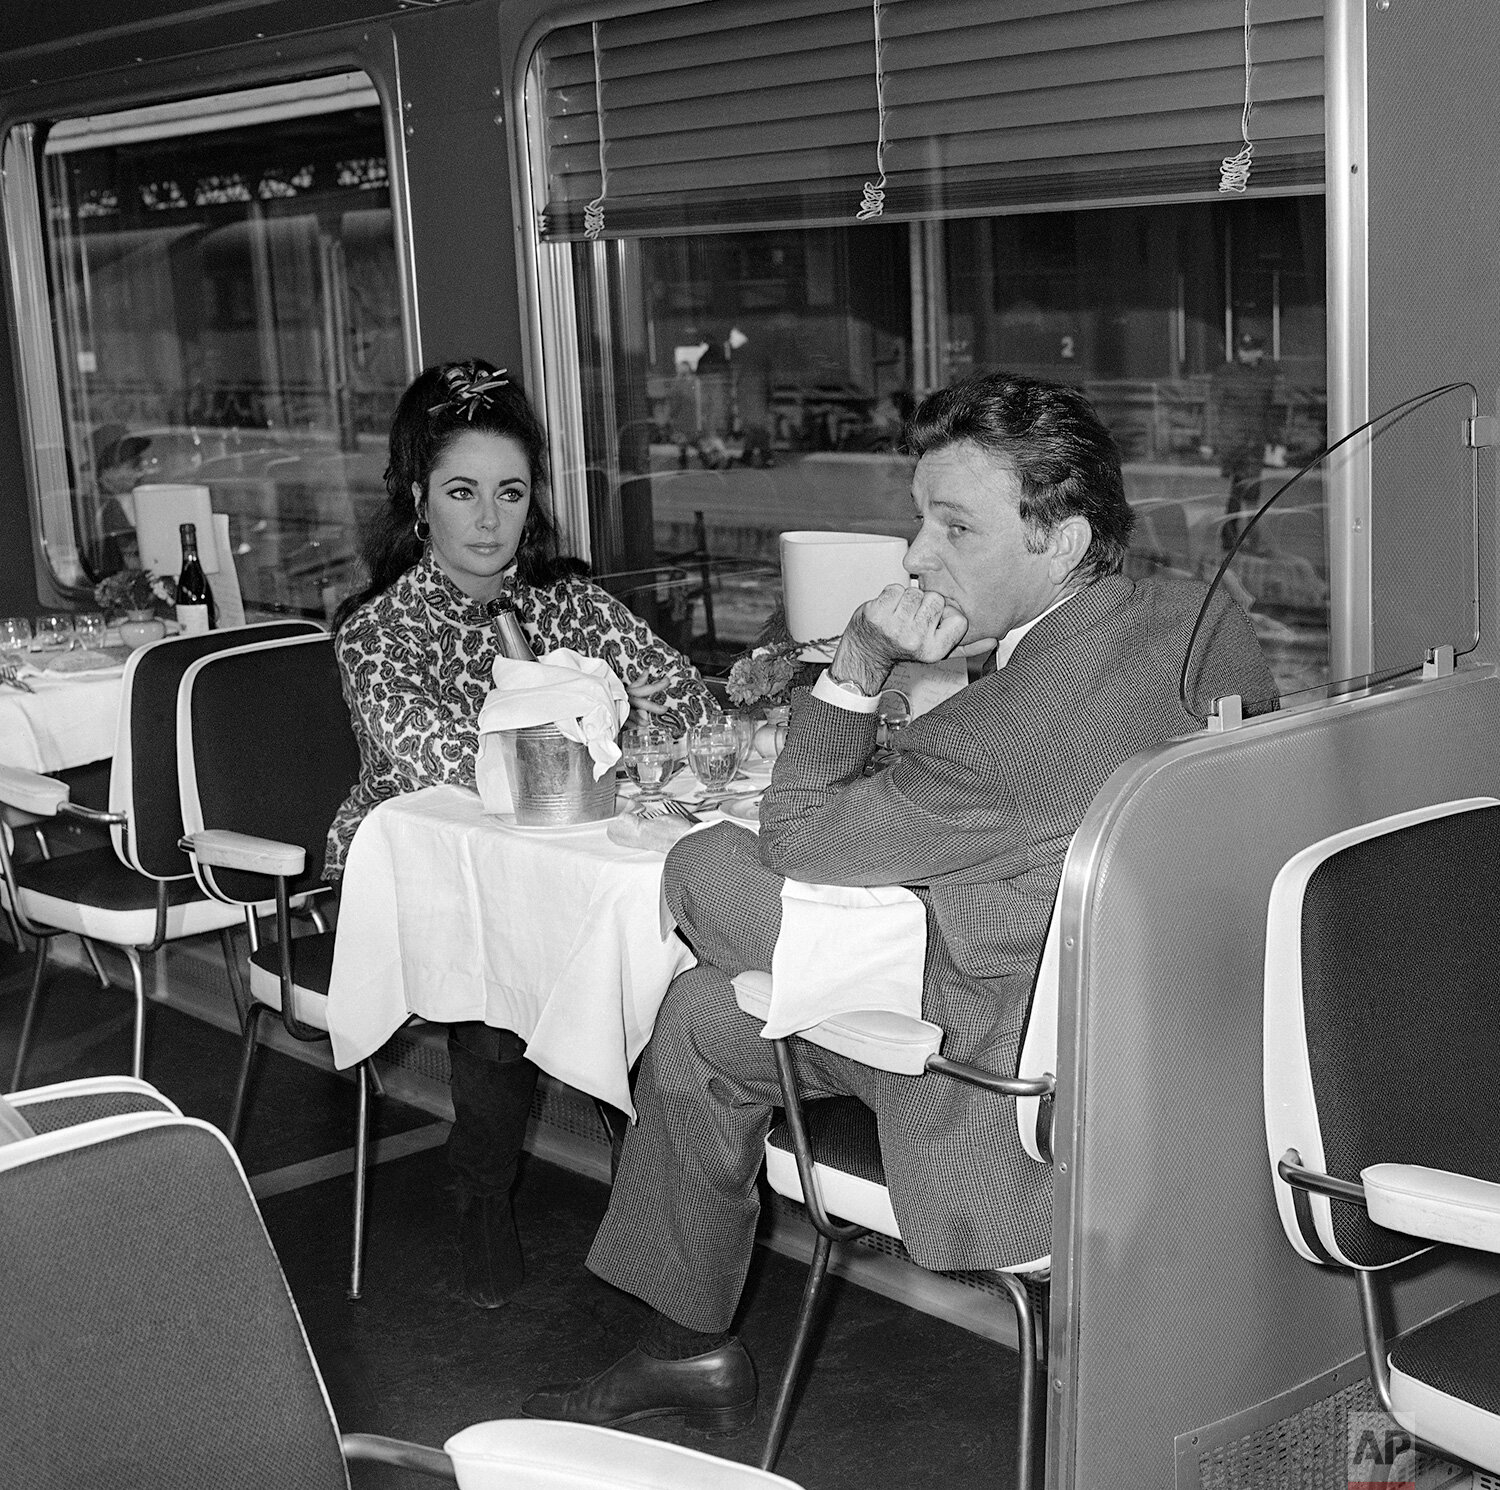  Elizabeth Taylor and her husband, Richard Burton have breakfast on board the Cisalpino train on Dec. 20, 1964. They are traveling to Gstaad, Switzerland where they will spend the holidays with their children. (AP Photo/Jean-Jacques Levy) 